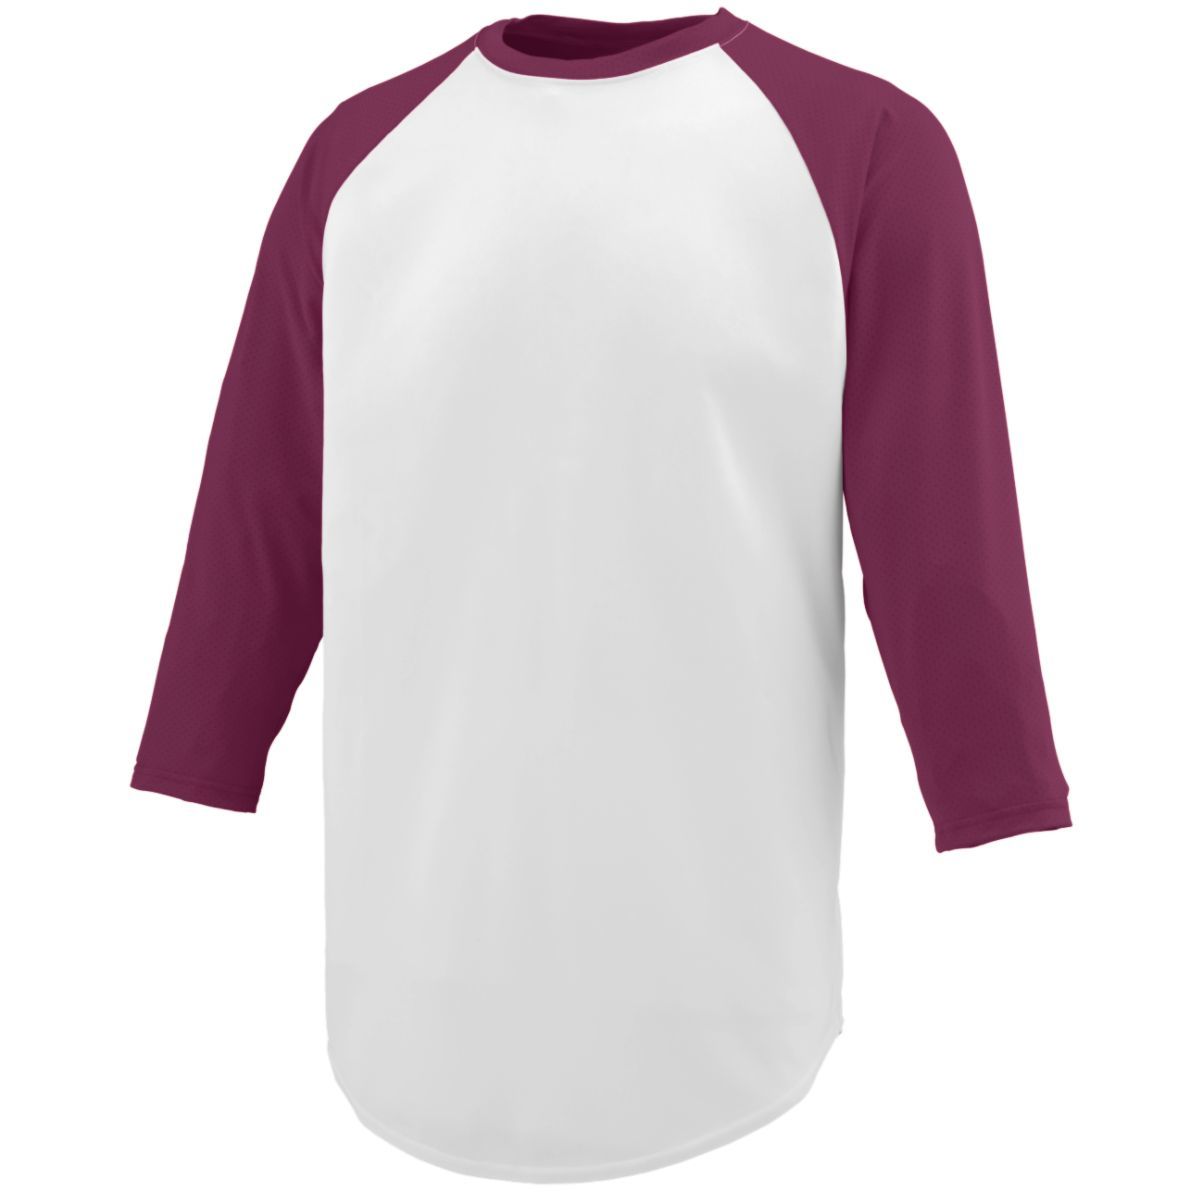 Augusta Sportswear Youth Nova Jersey in White/Maroon  -Part of the Youth, Youth-Jersey, Augusta-Products, Baseball, Shirts, All-Sports, All-Sports-1 product lines at KanaleyCreations.com